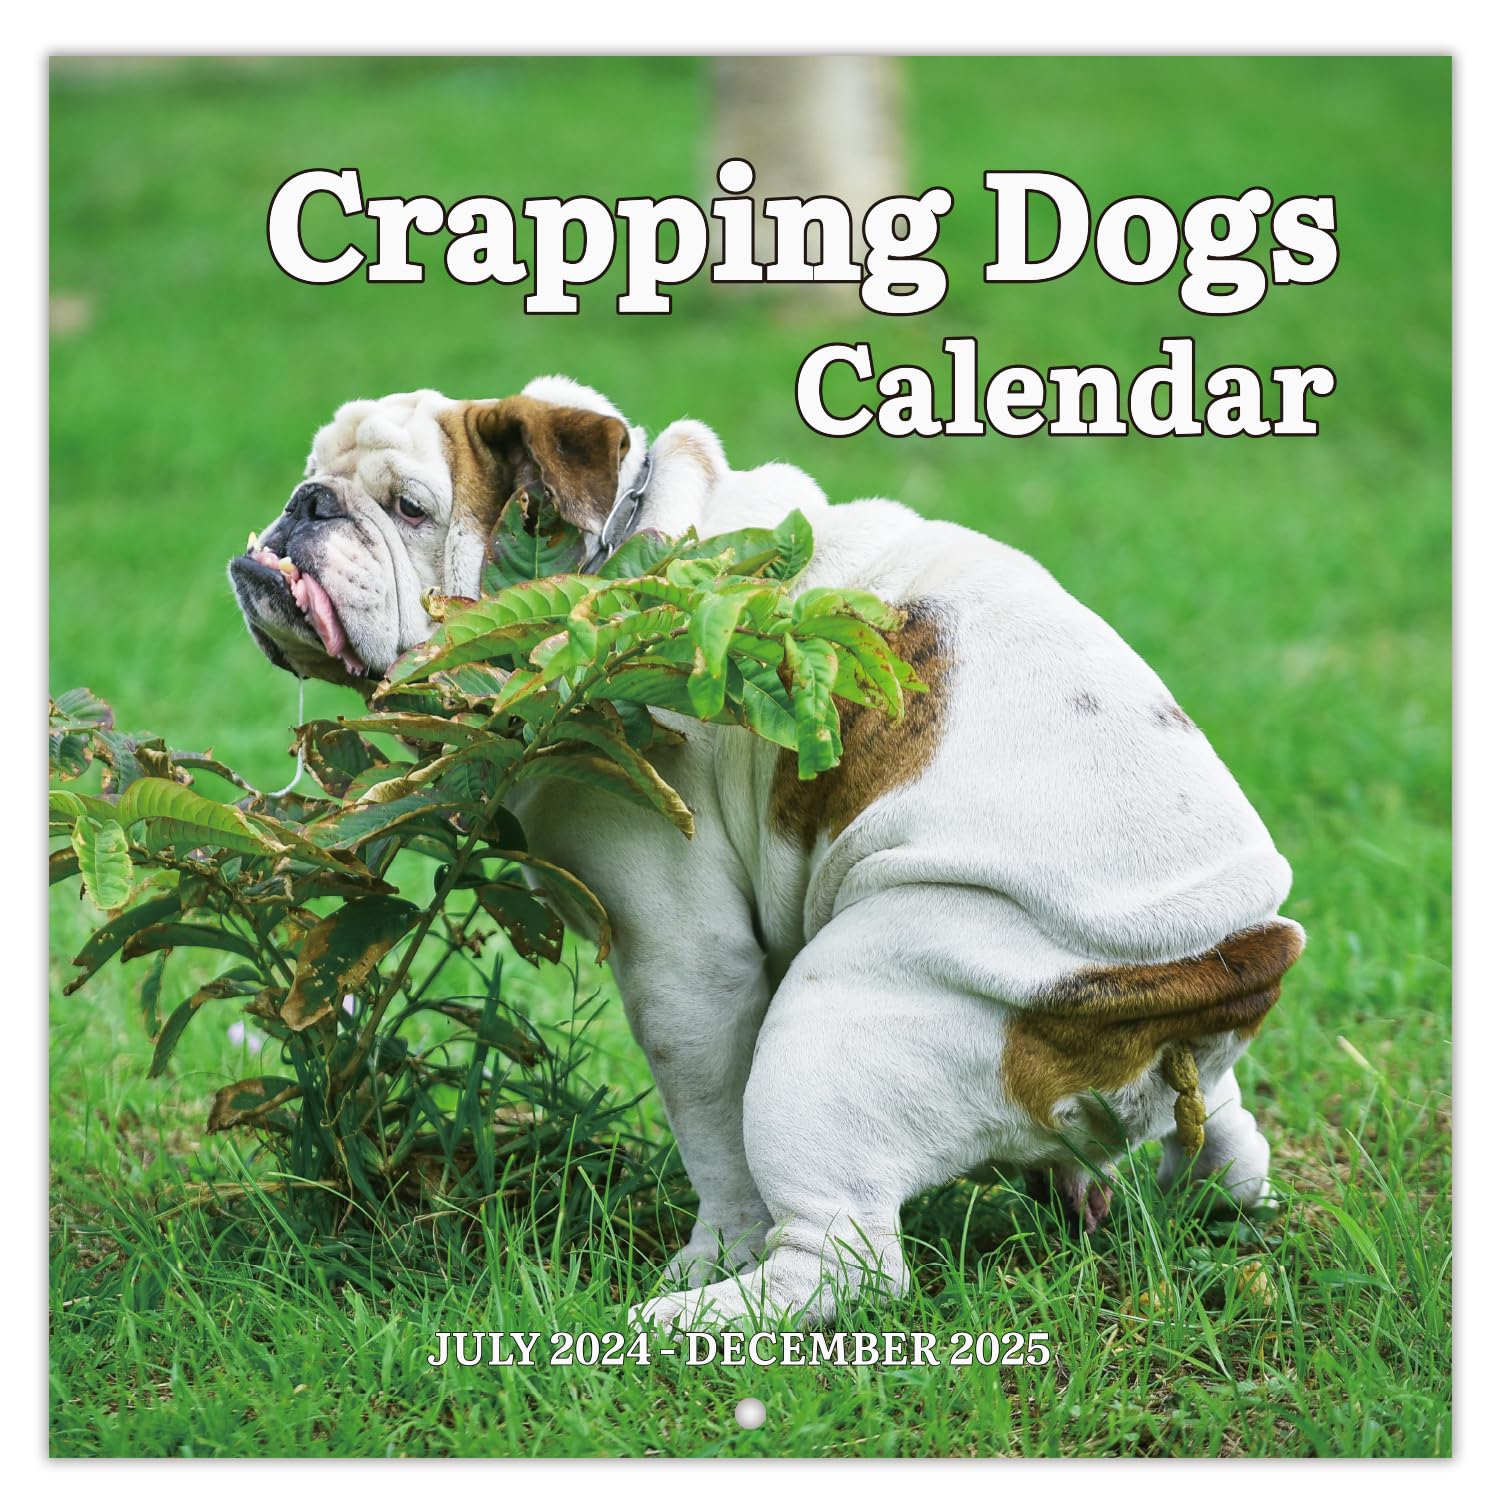 2024-2025 Wall Calendar – 18 Monthly Pooping Dogs Calendar 2024-2025, Jul 2024 - Dec 2025, Funny Dog Calendar Gag Gifts, 11.8" x 23.6" (Open), 11.8" x 11.8"(Closed), Perfect White Elephant Gift Funny